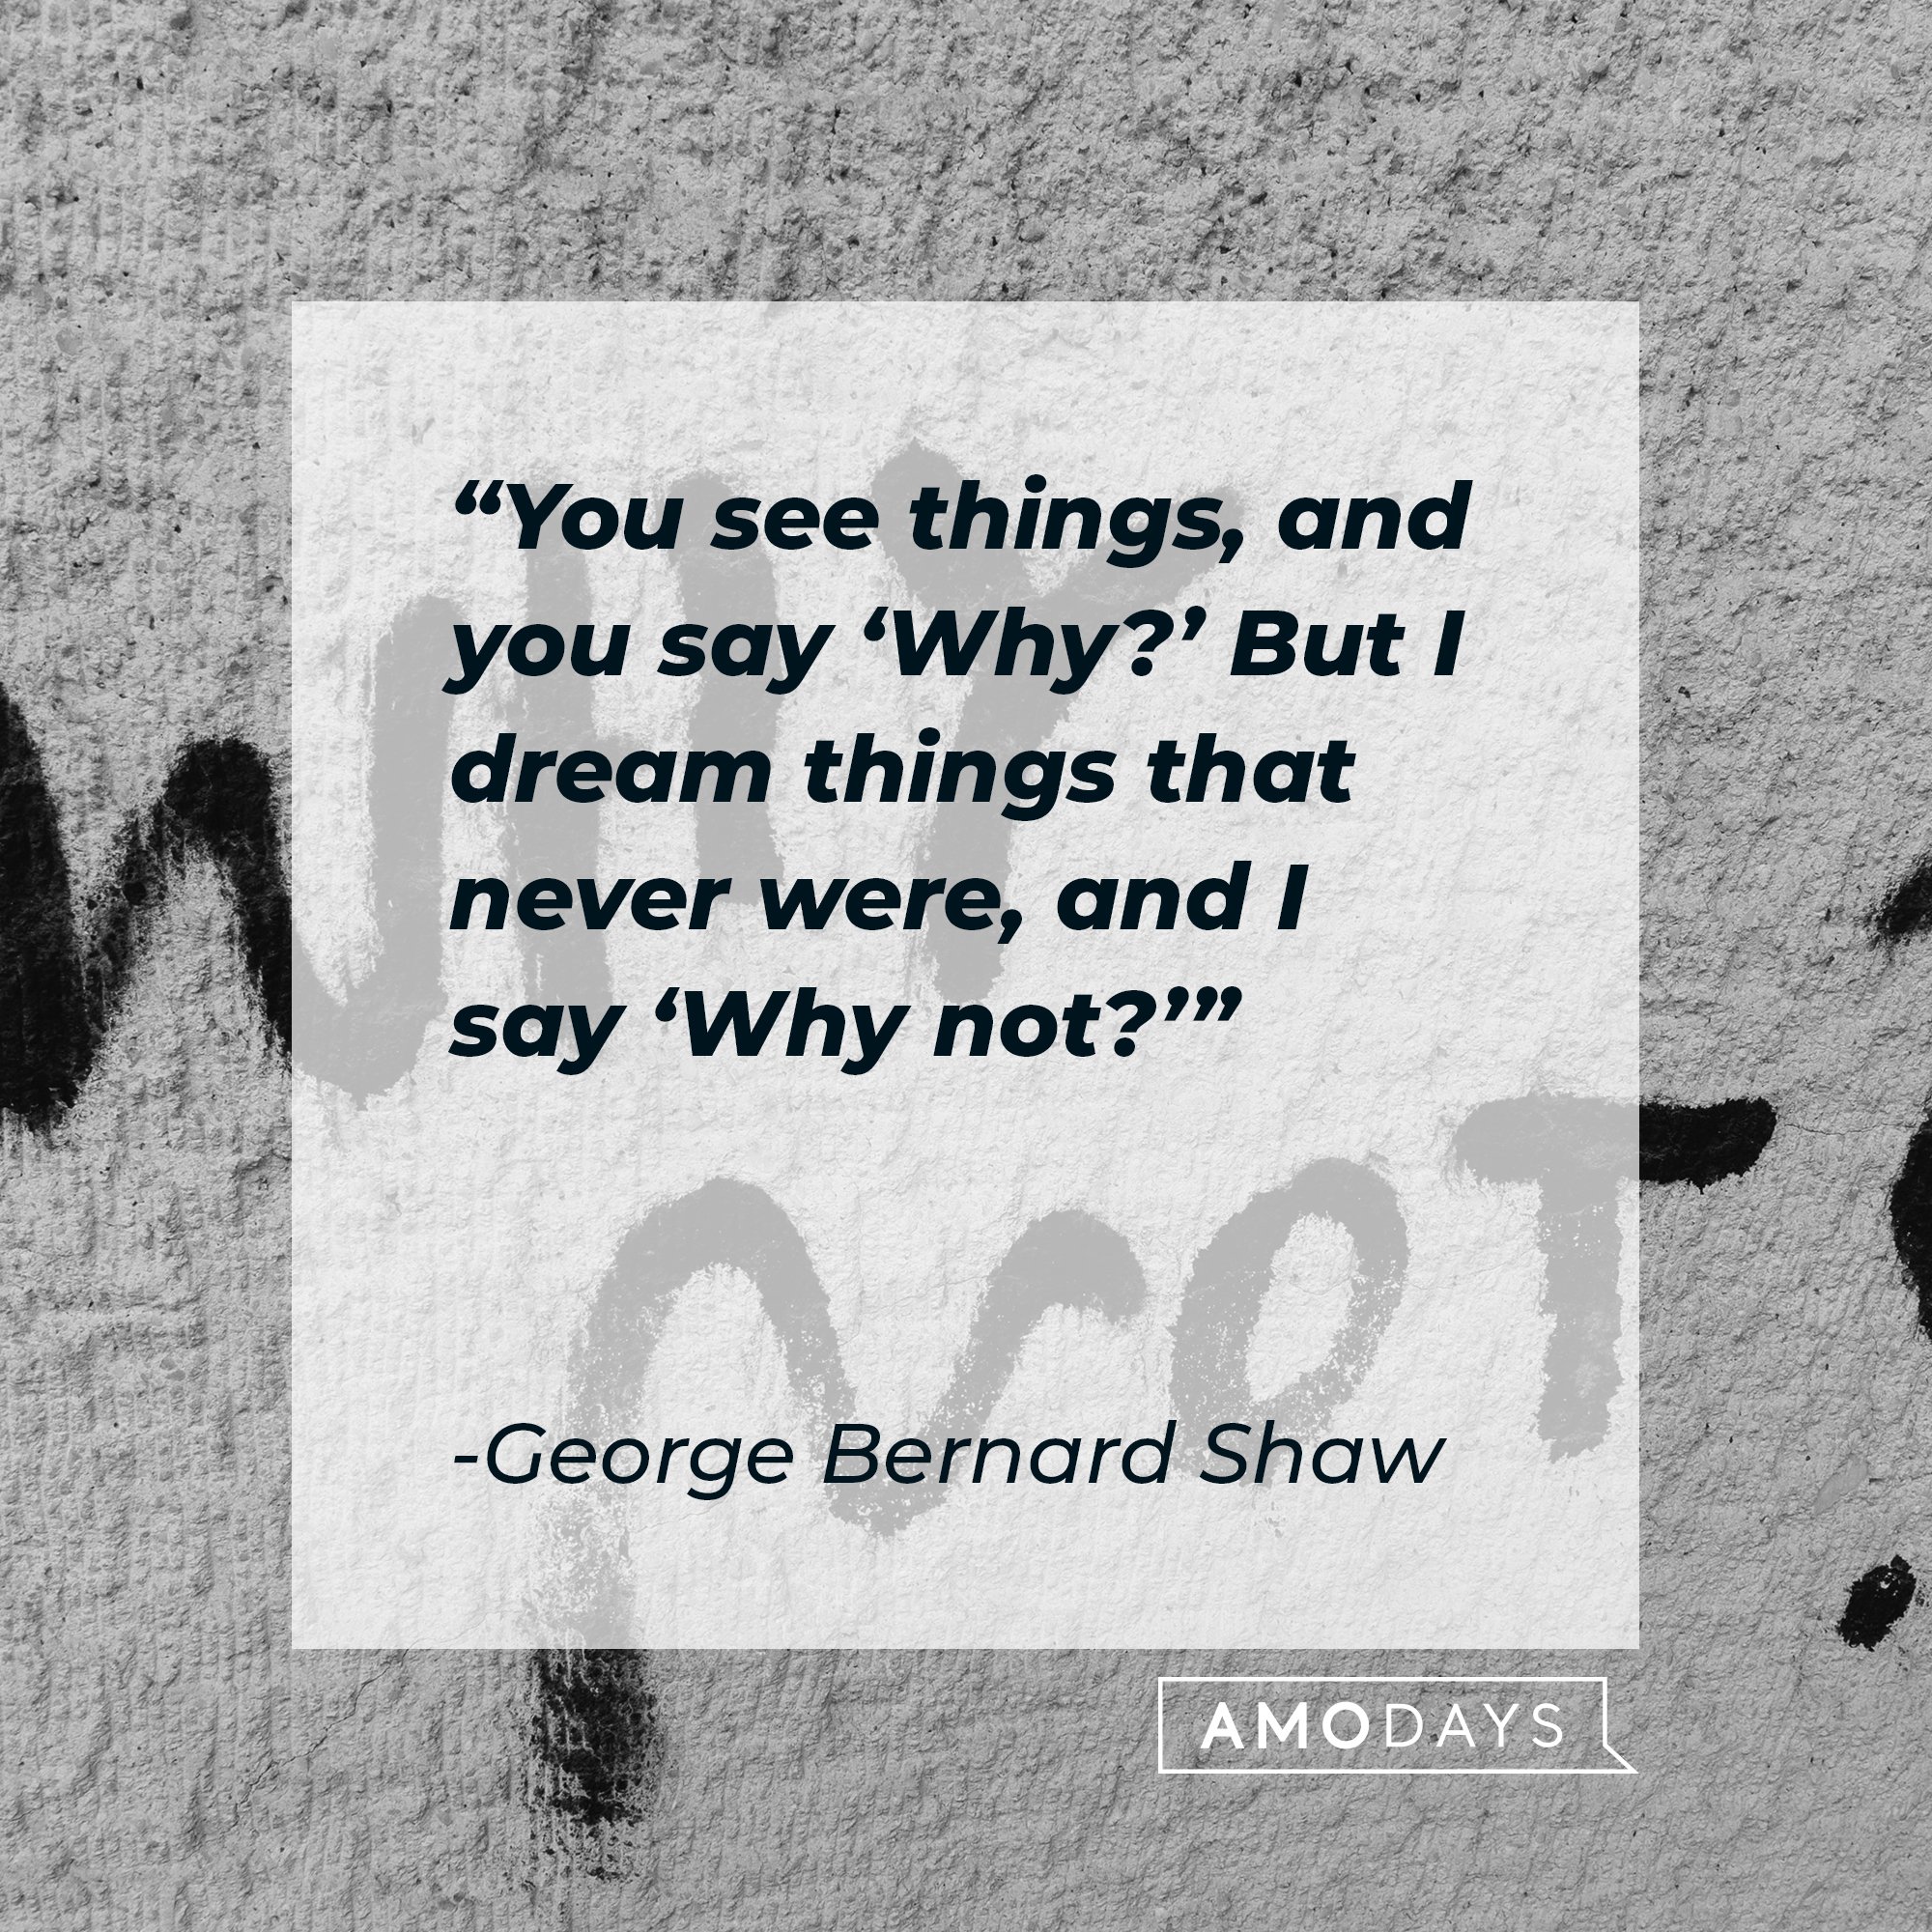 George Bernard Shaw’s quote: "You see things, and you say 'Why?' But I dream things that never were, and I say 'Why not?'" | Image: AmoDays